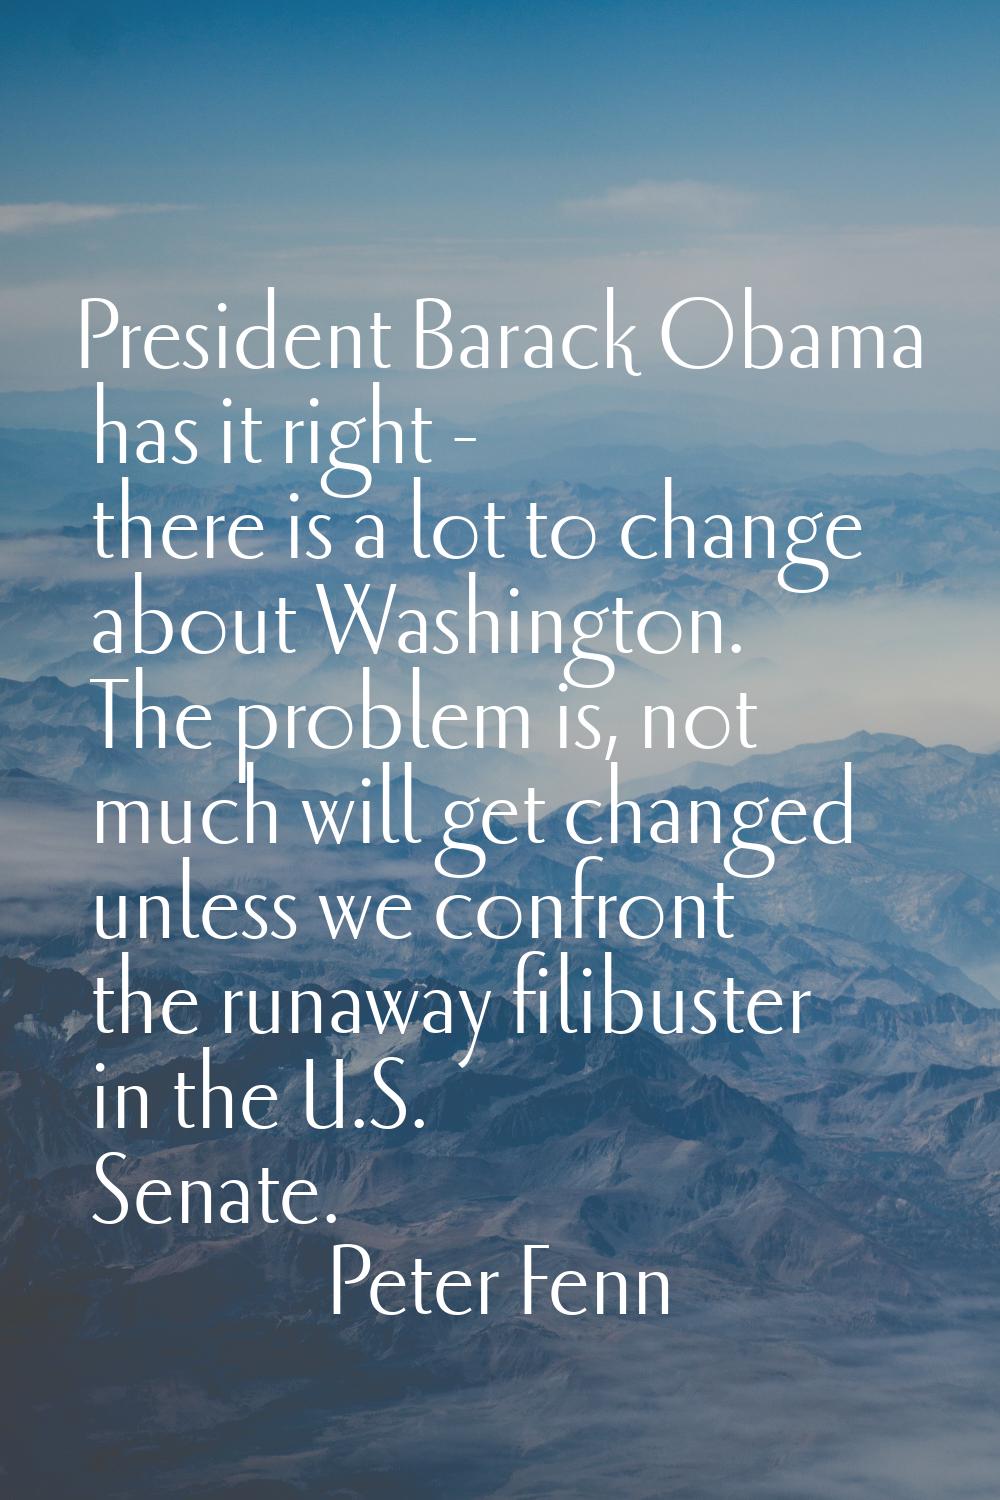 President Barack Obama has it right - there is a lot to change about Washington. The problem is, no